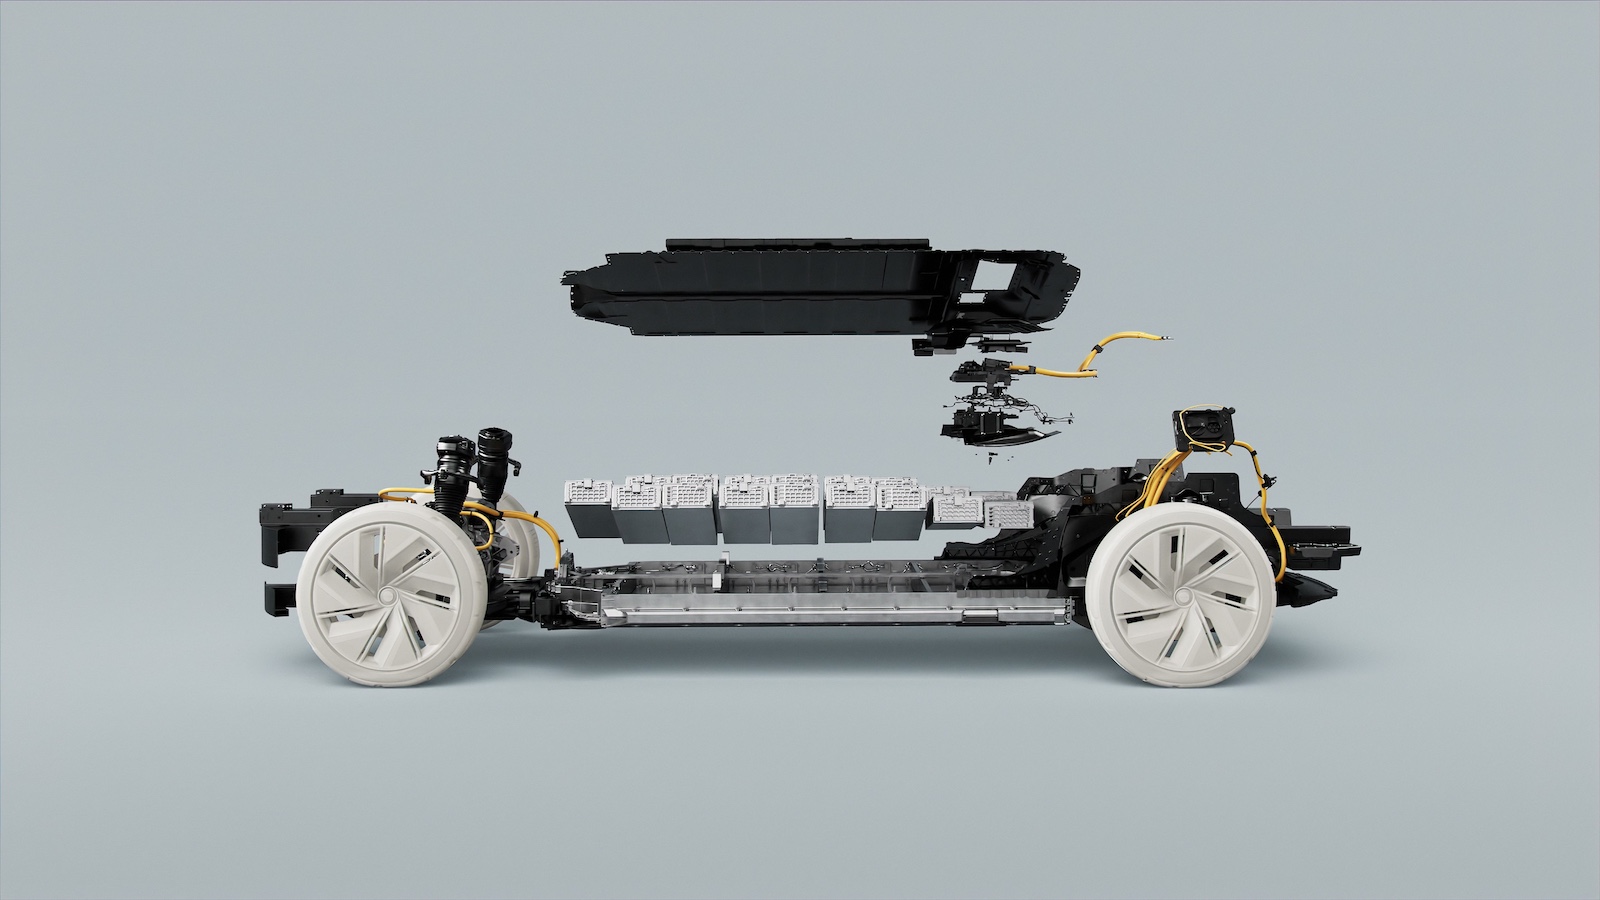 Volvo Cars Partners with & Invests in Breathe for Next-Generation Fast Charging - CleanTechnica